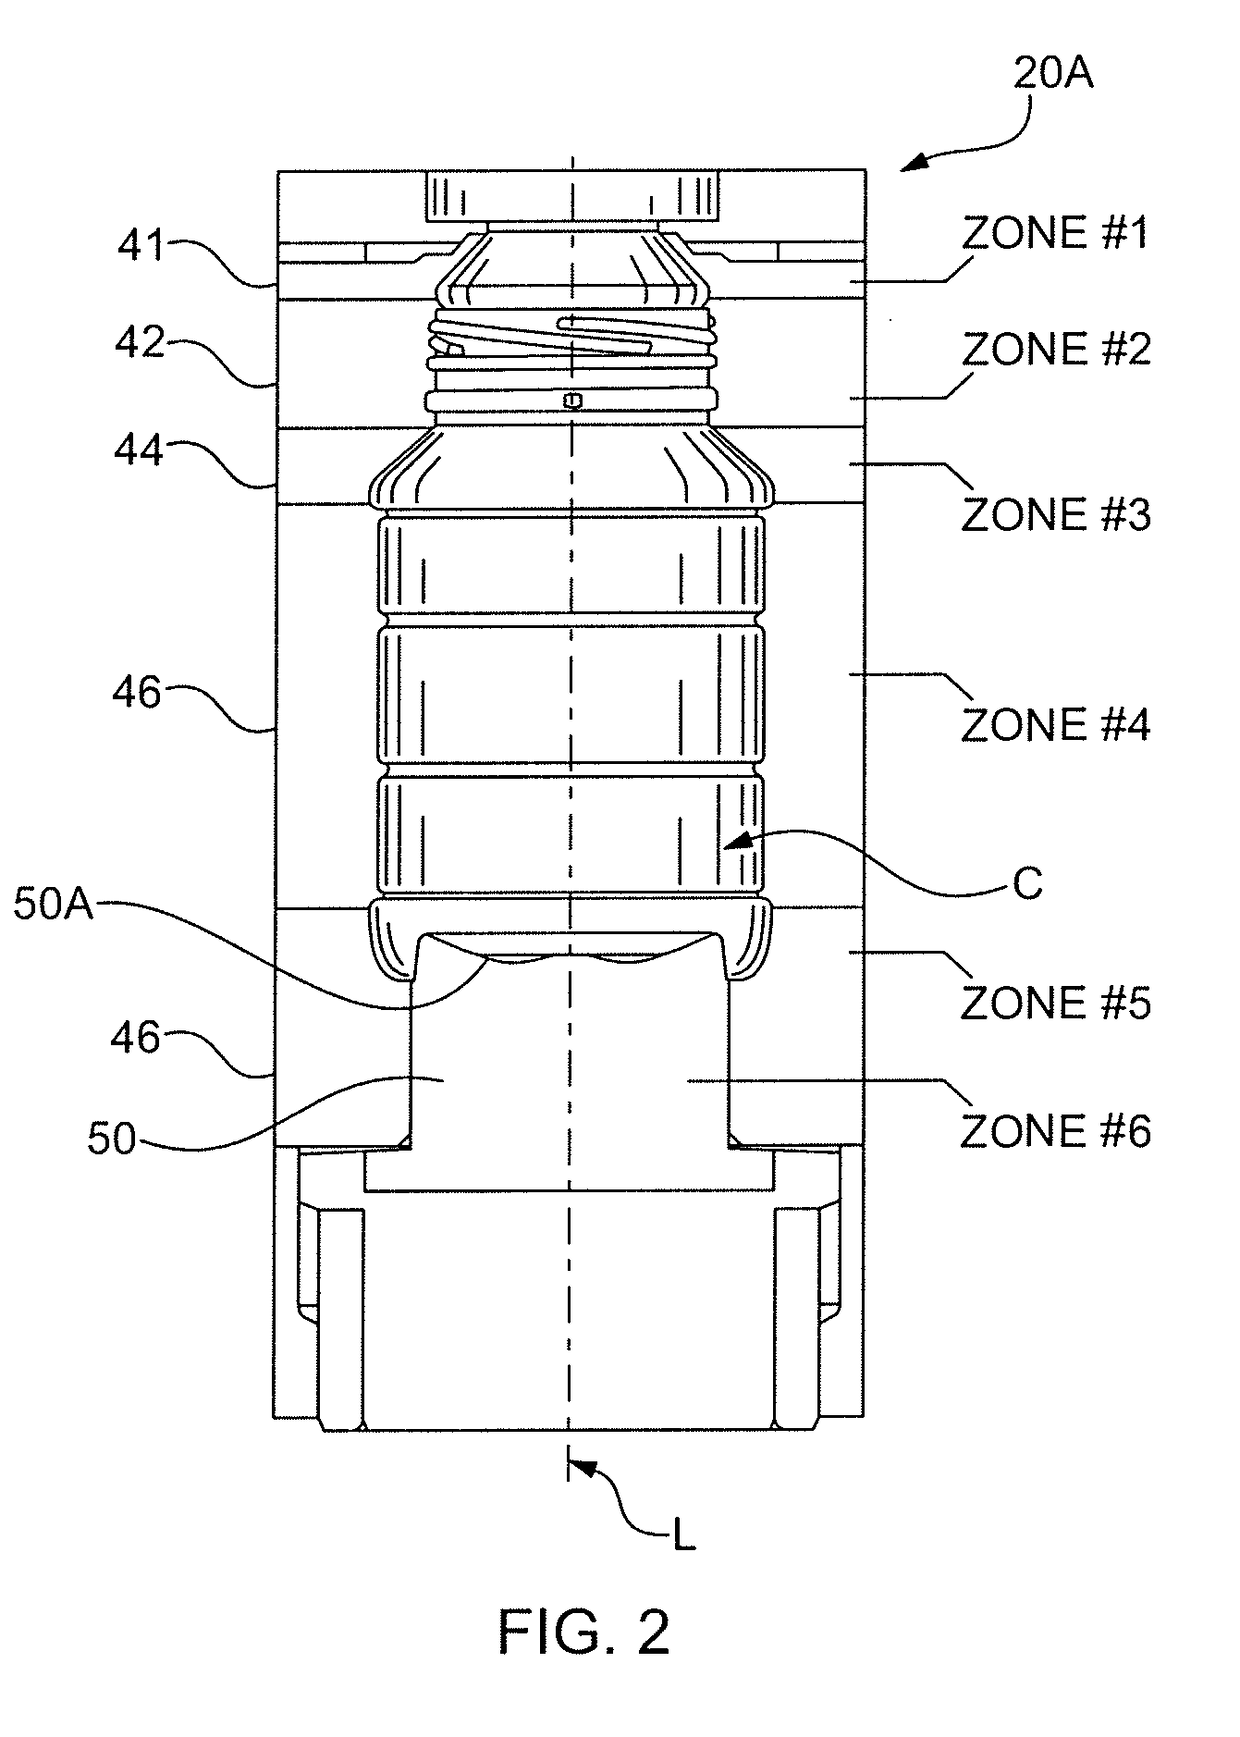 In-line blow mold cleaning device and method of use